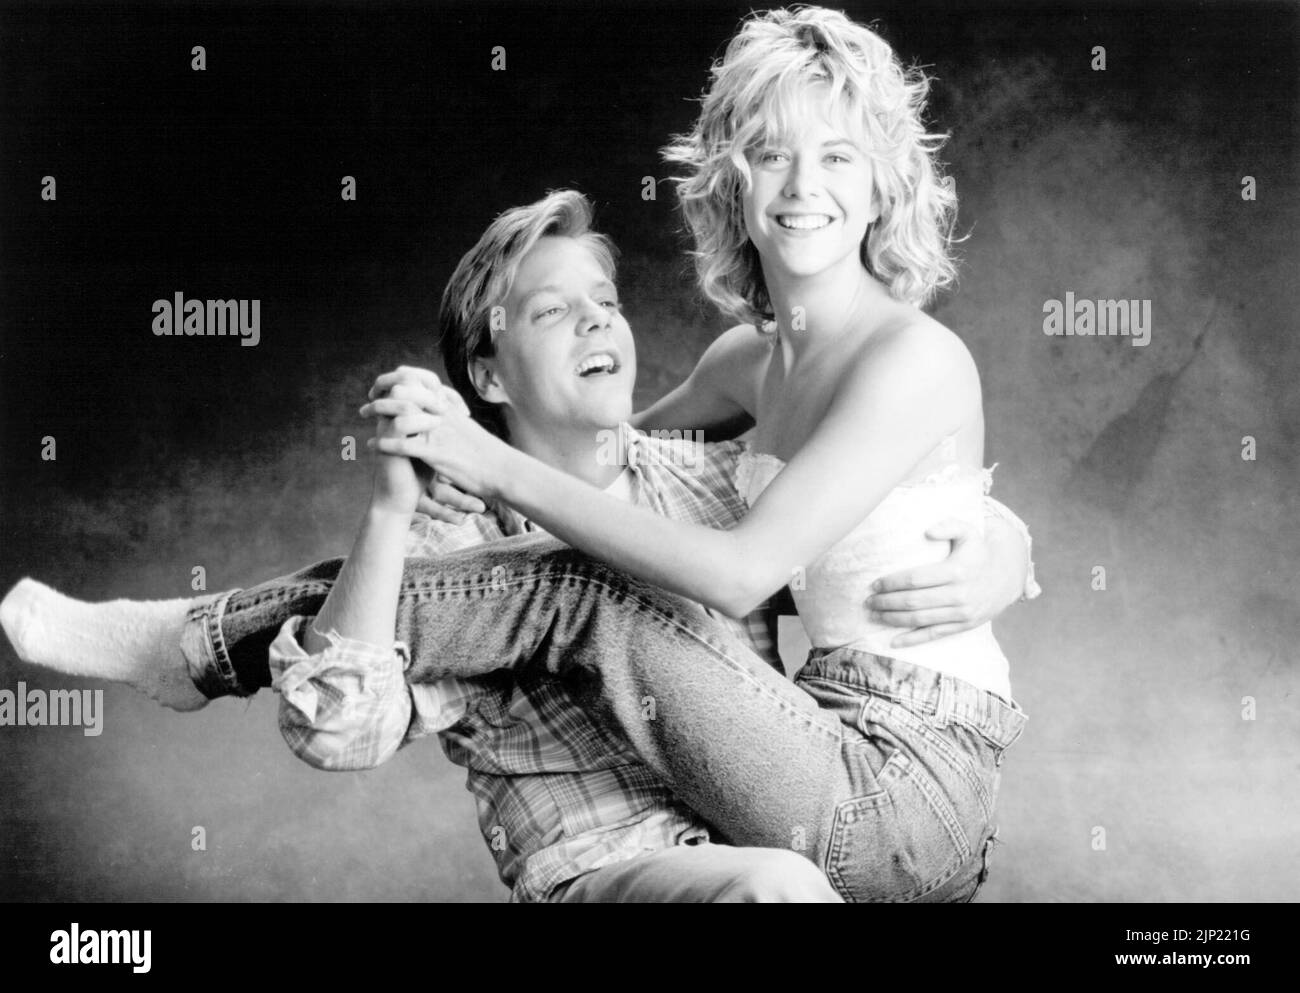 KIEFER SUTHERLAND and MEG RYAN in PROMISED LAND (1987), directed by MICHAEL HOFFMAN. Copyright: Editorial use only. No merchandising or book covers. This is a publicly distributed handout. Access rights only, no license of copyright provided. Only to be reproduced in conjunction with promotion of this film. Credit: VESTRON PICTURES / Album Stock Photo